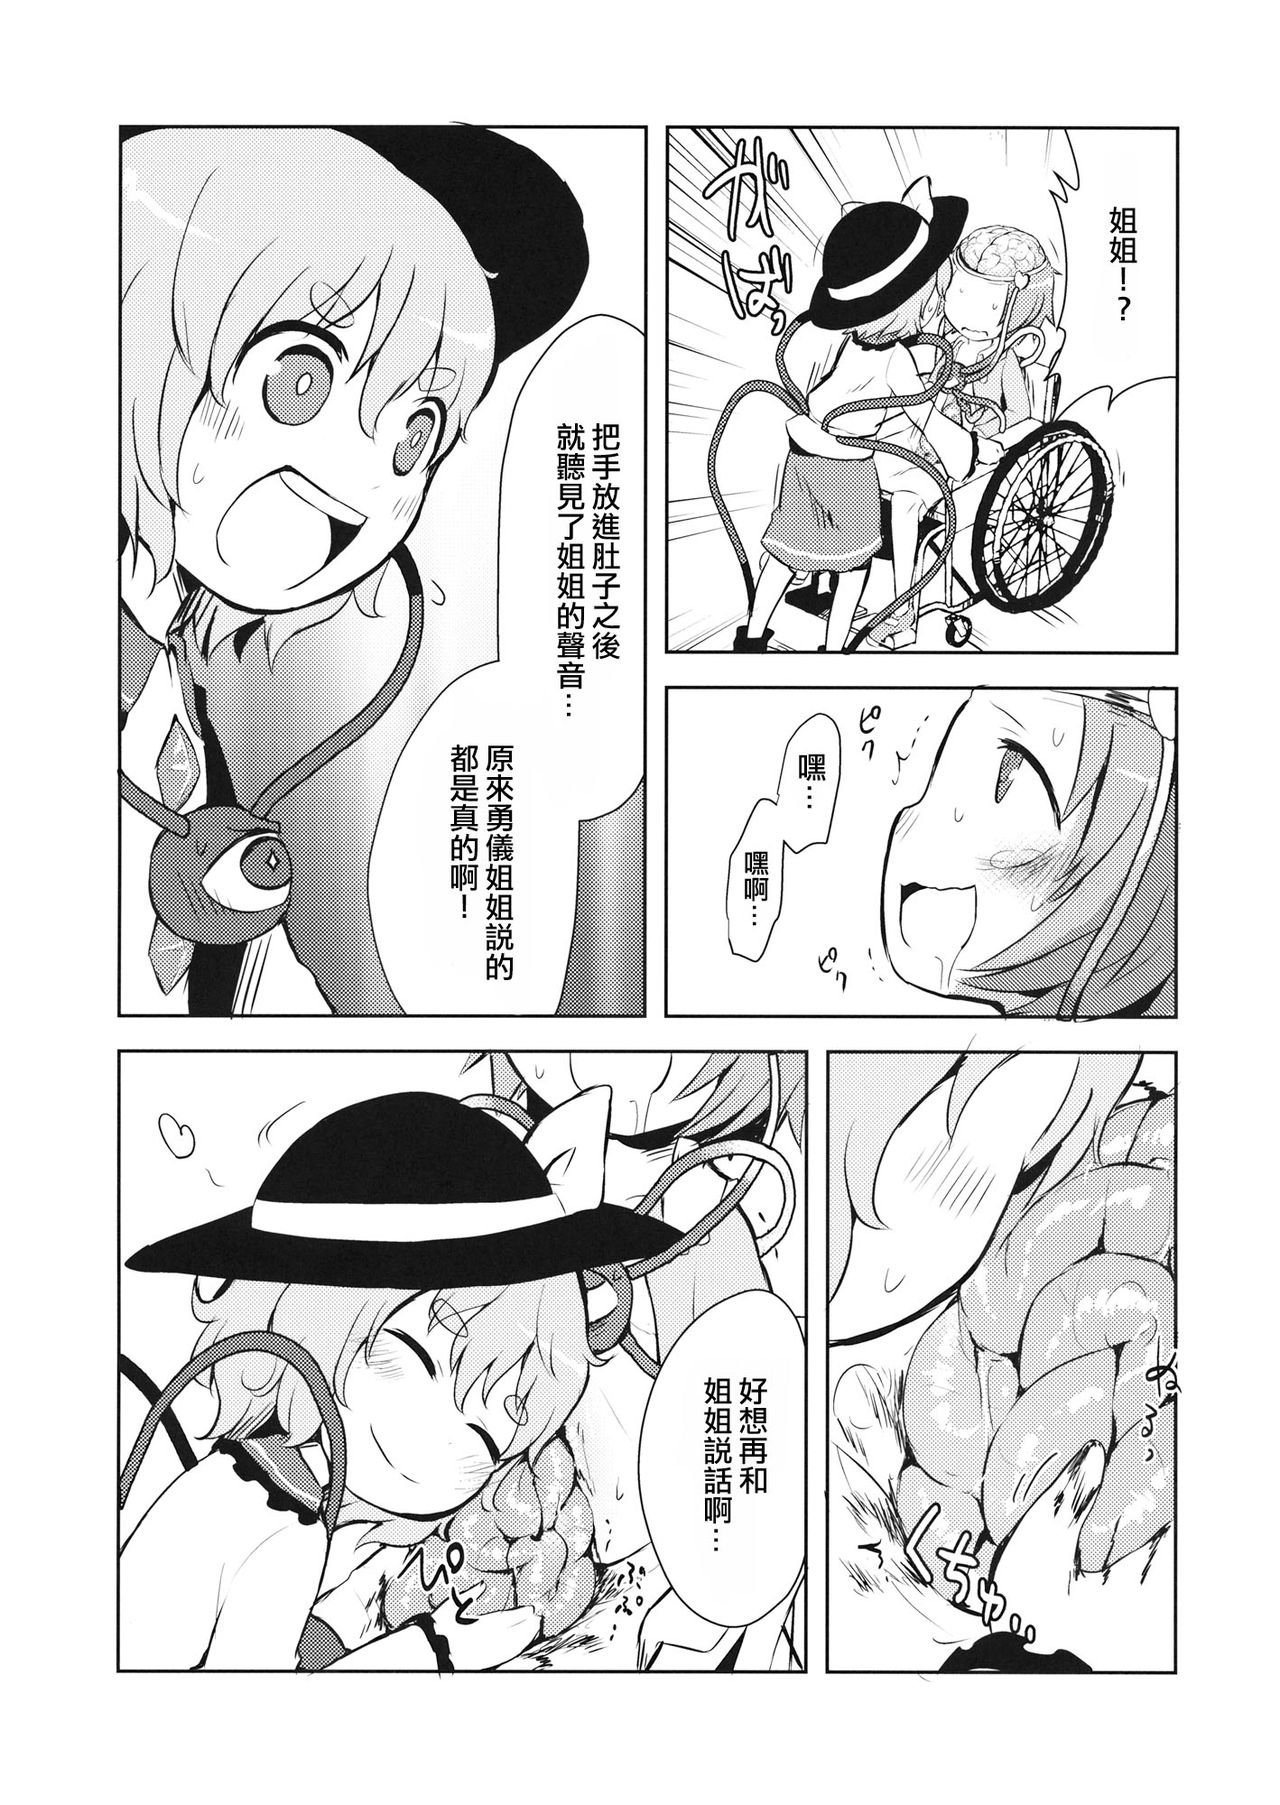 (Reitaisai 13) [02 (Harasaki)] FREAKS OUT! (Touhou Project) [Chinese] [沒有漢化] page 15 full